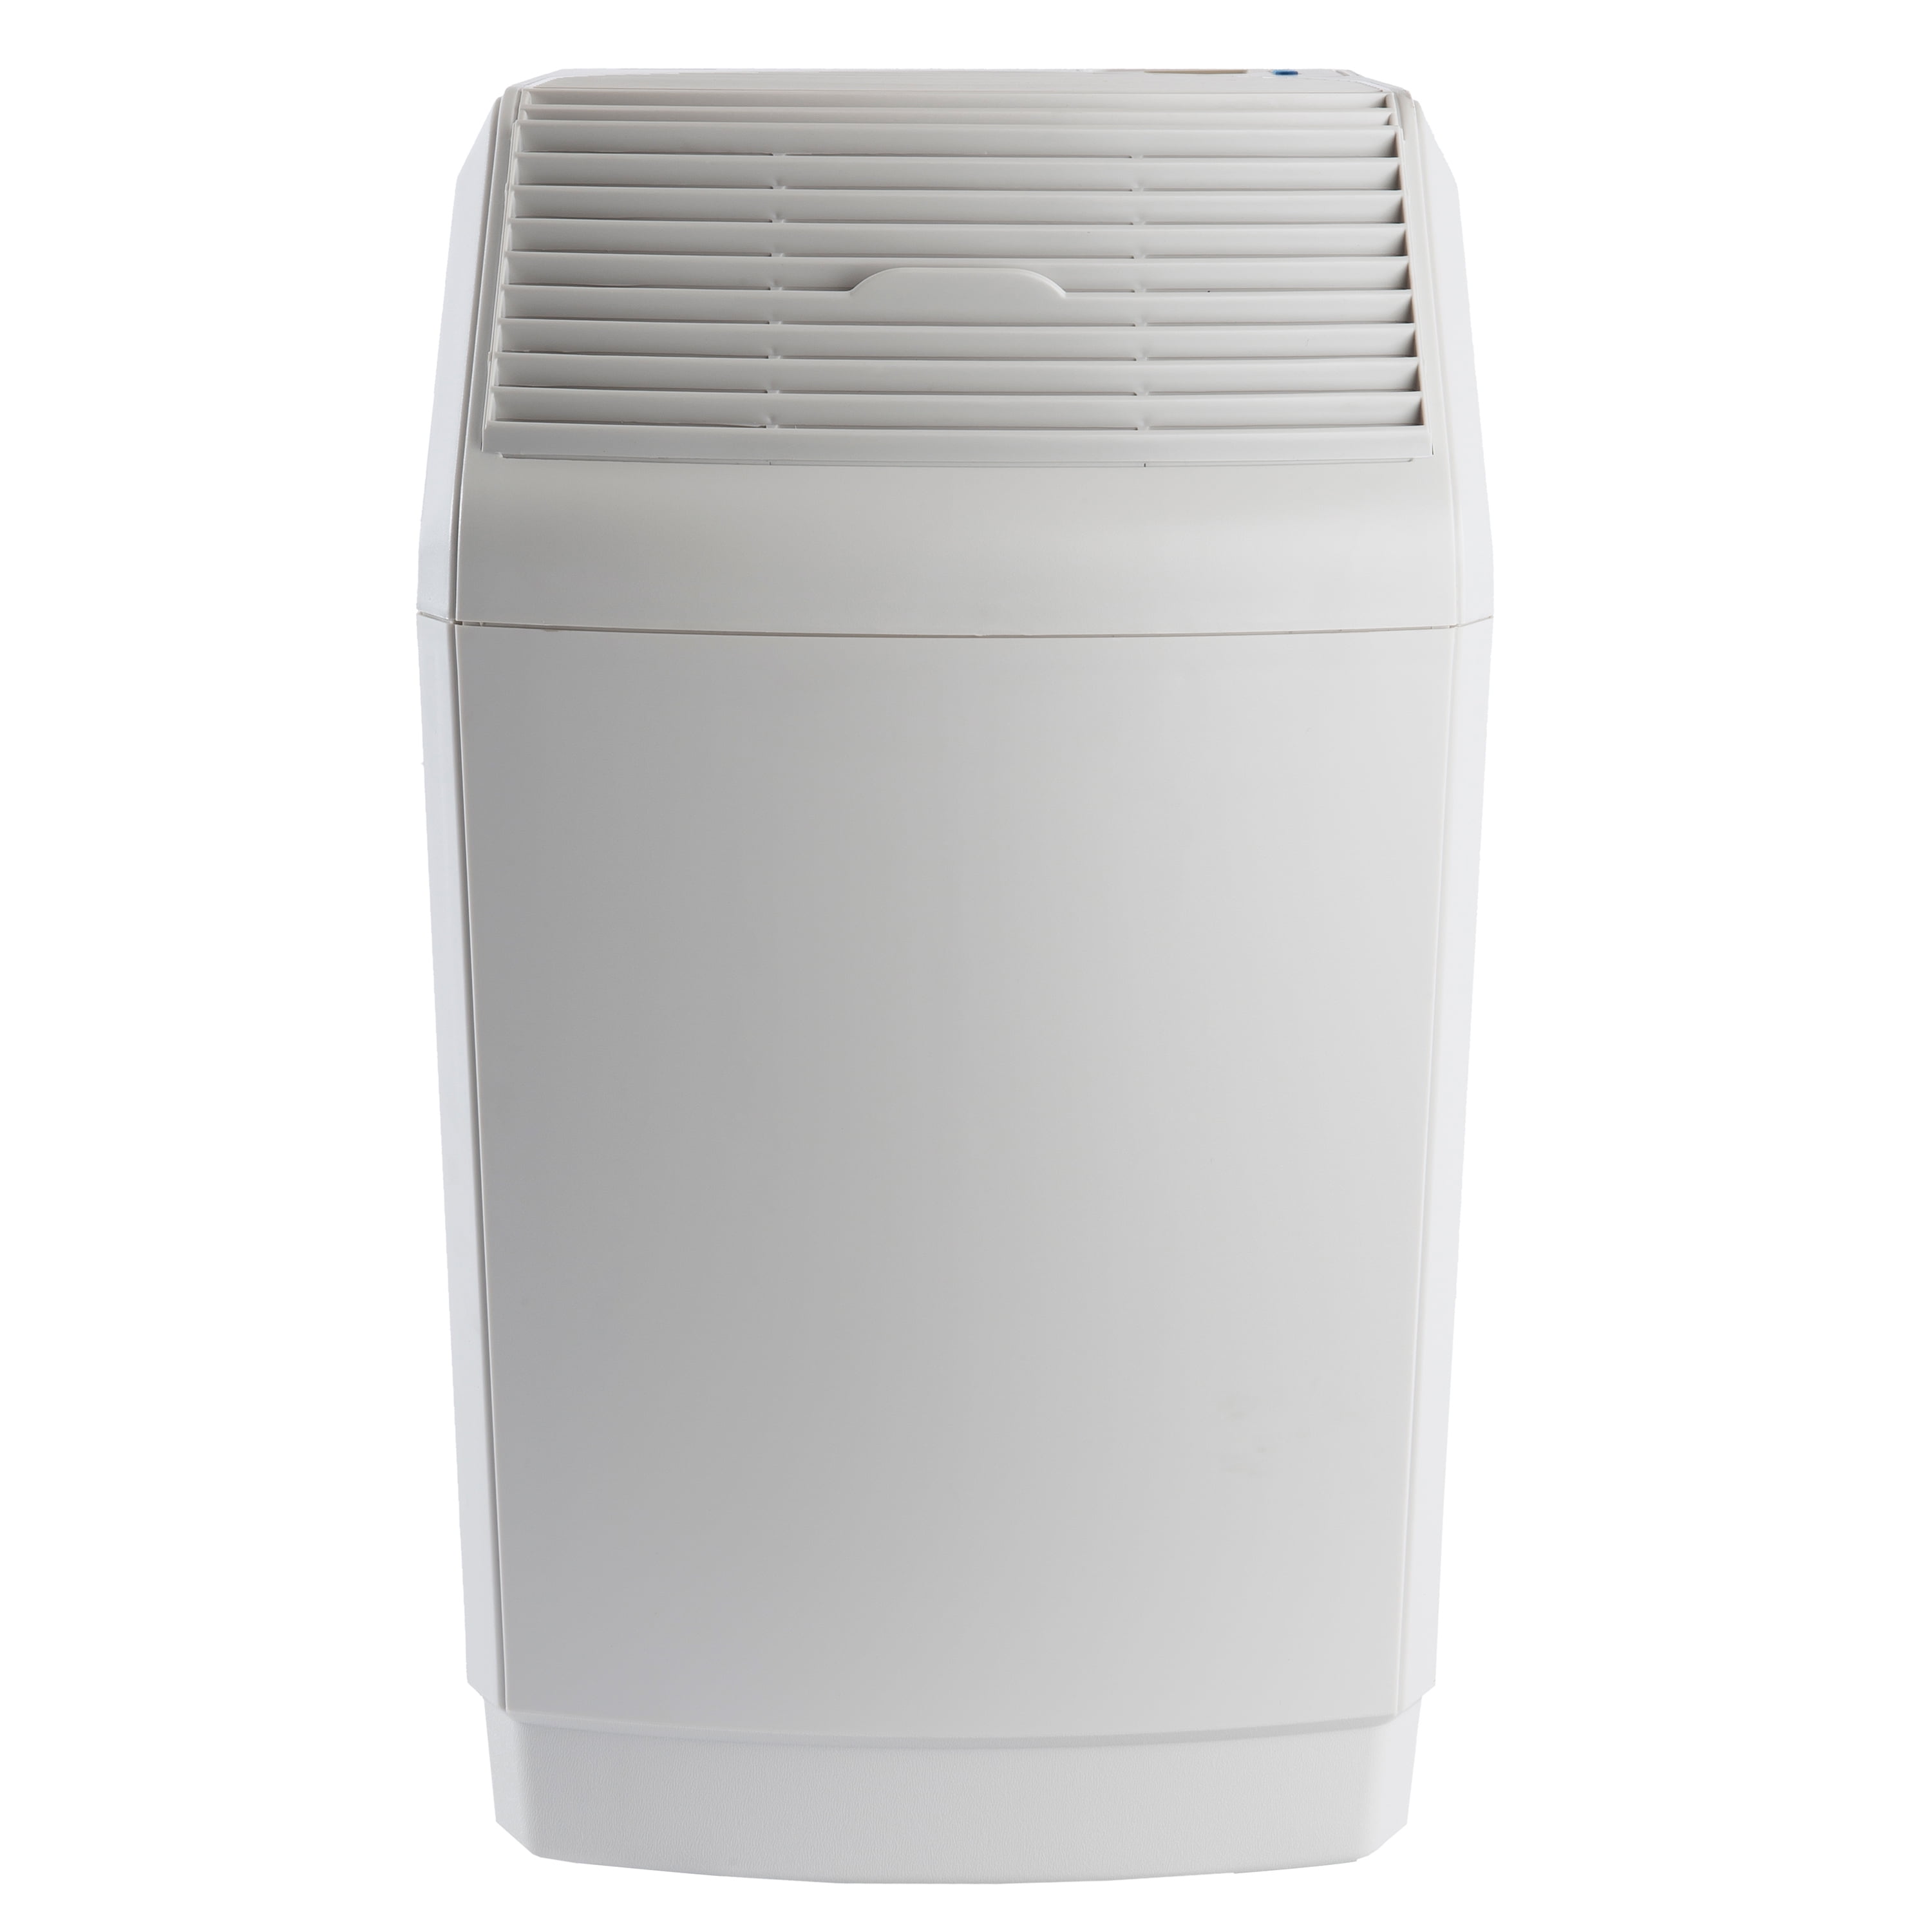 AIRCARE 831000 Space Saver Evaporative Humidifier White for sale online 